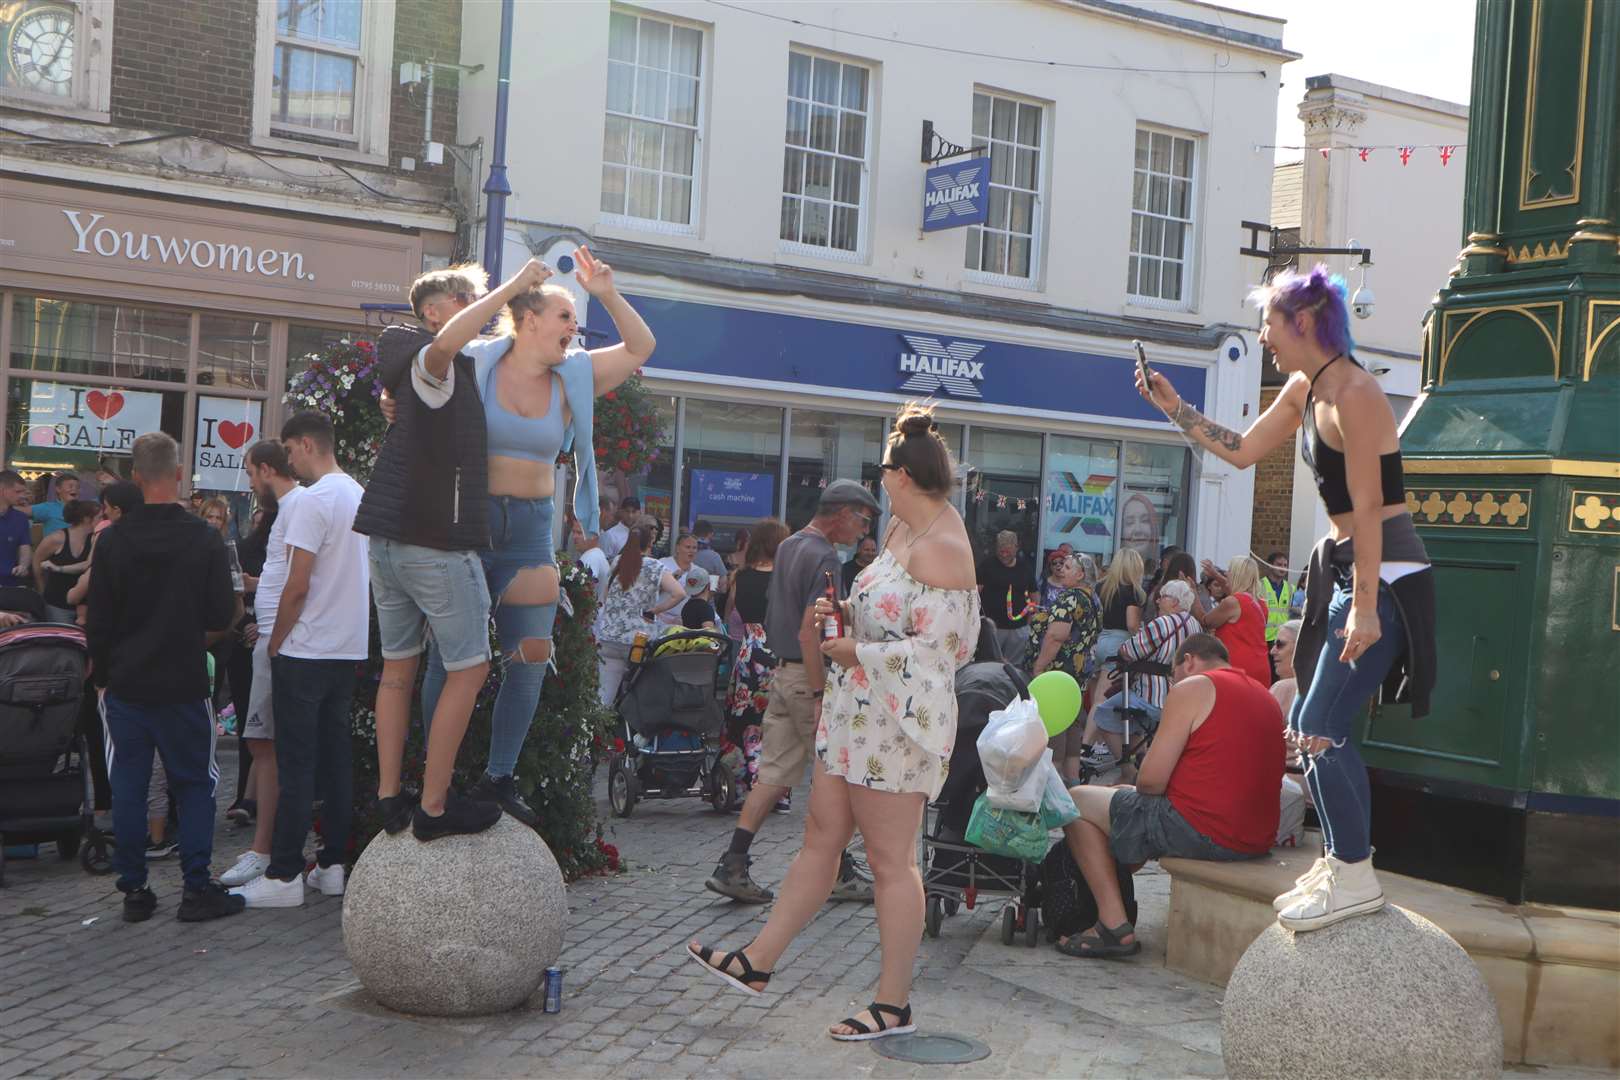 Revellers soaking up the Sheppey carnival atmosphere in Sheerness on Saturday